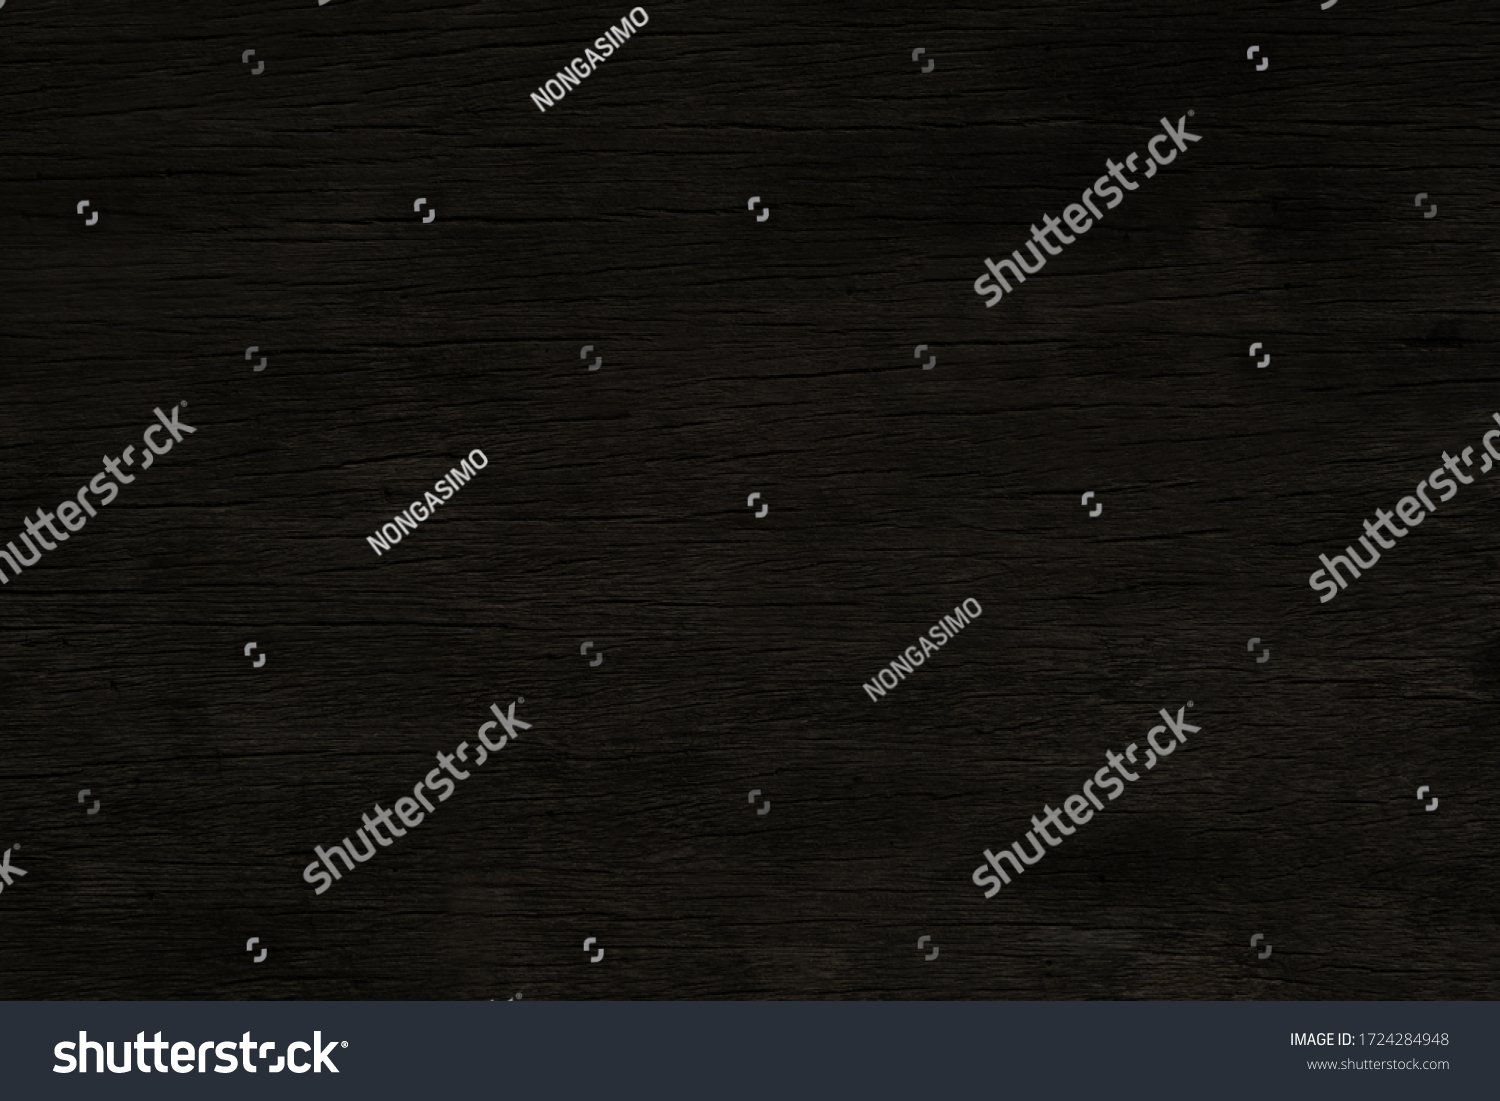 Dark brown wood with broken pattern on surface  for texture and background #1724284948